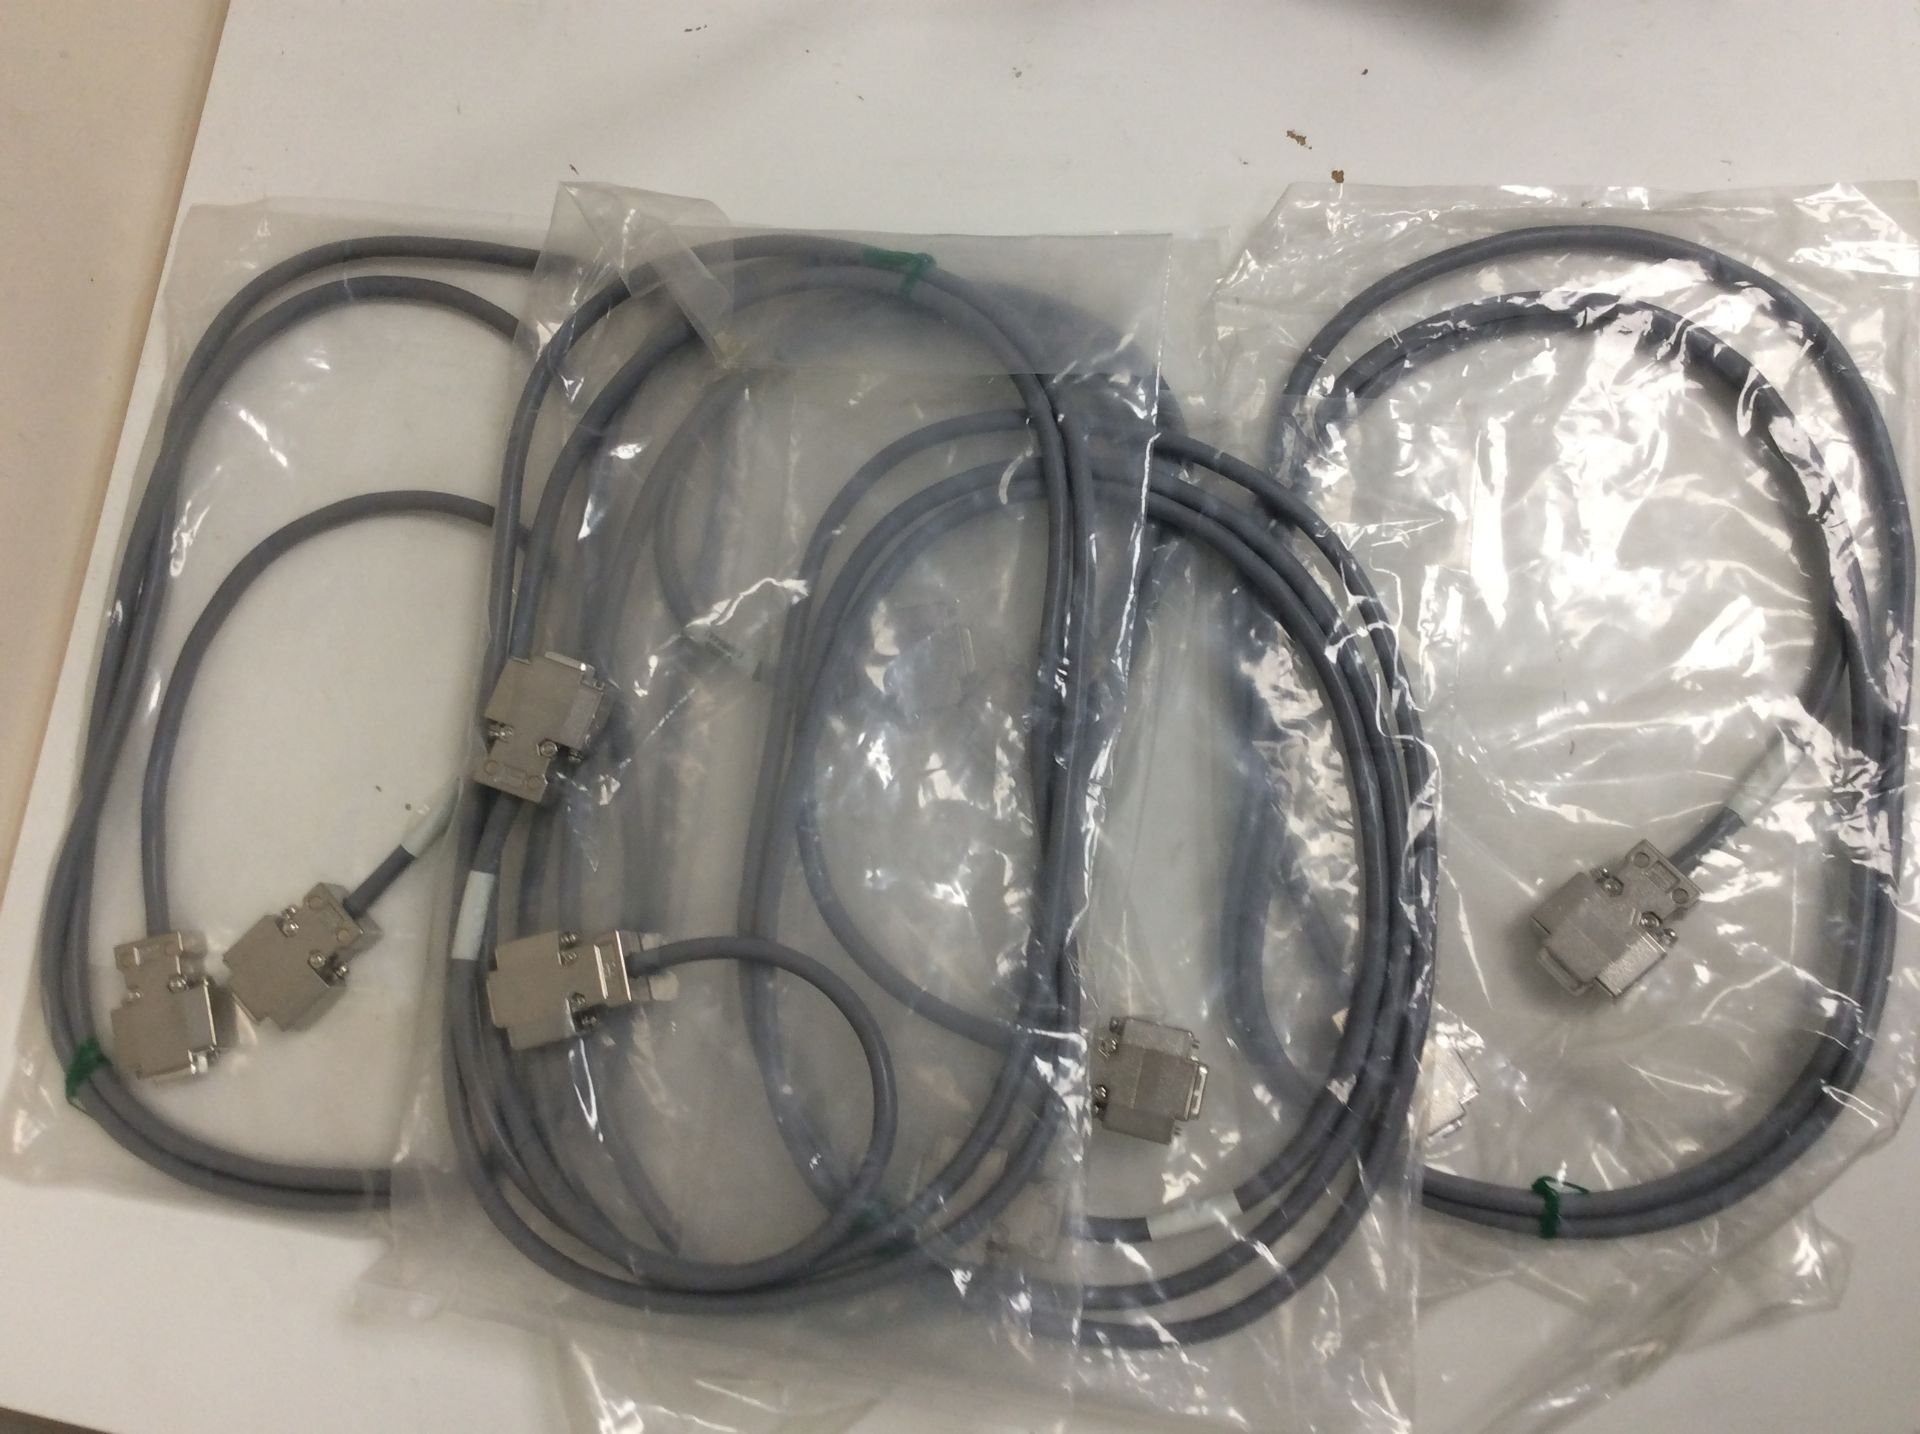 5x J0654a anritsu test cable